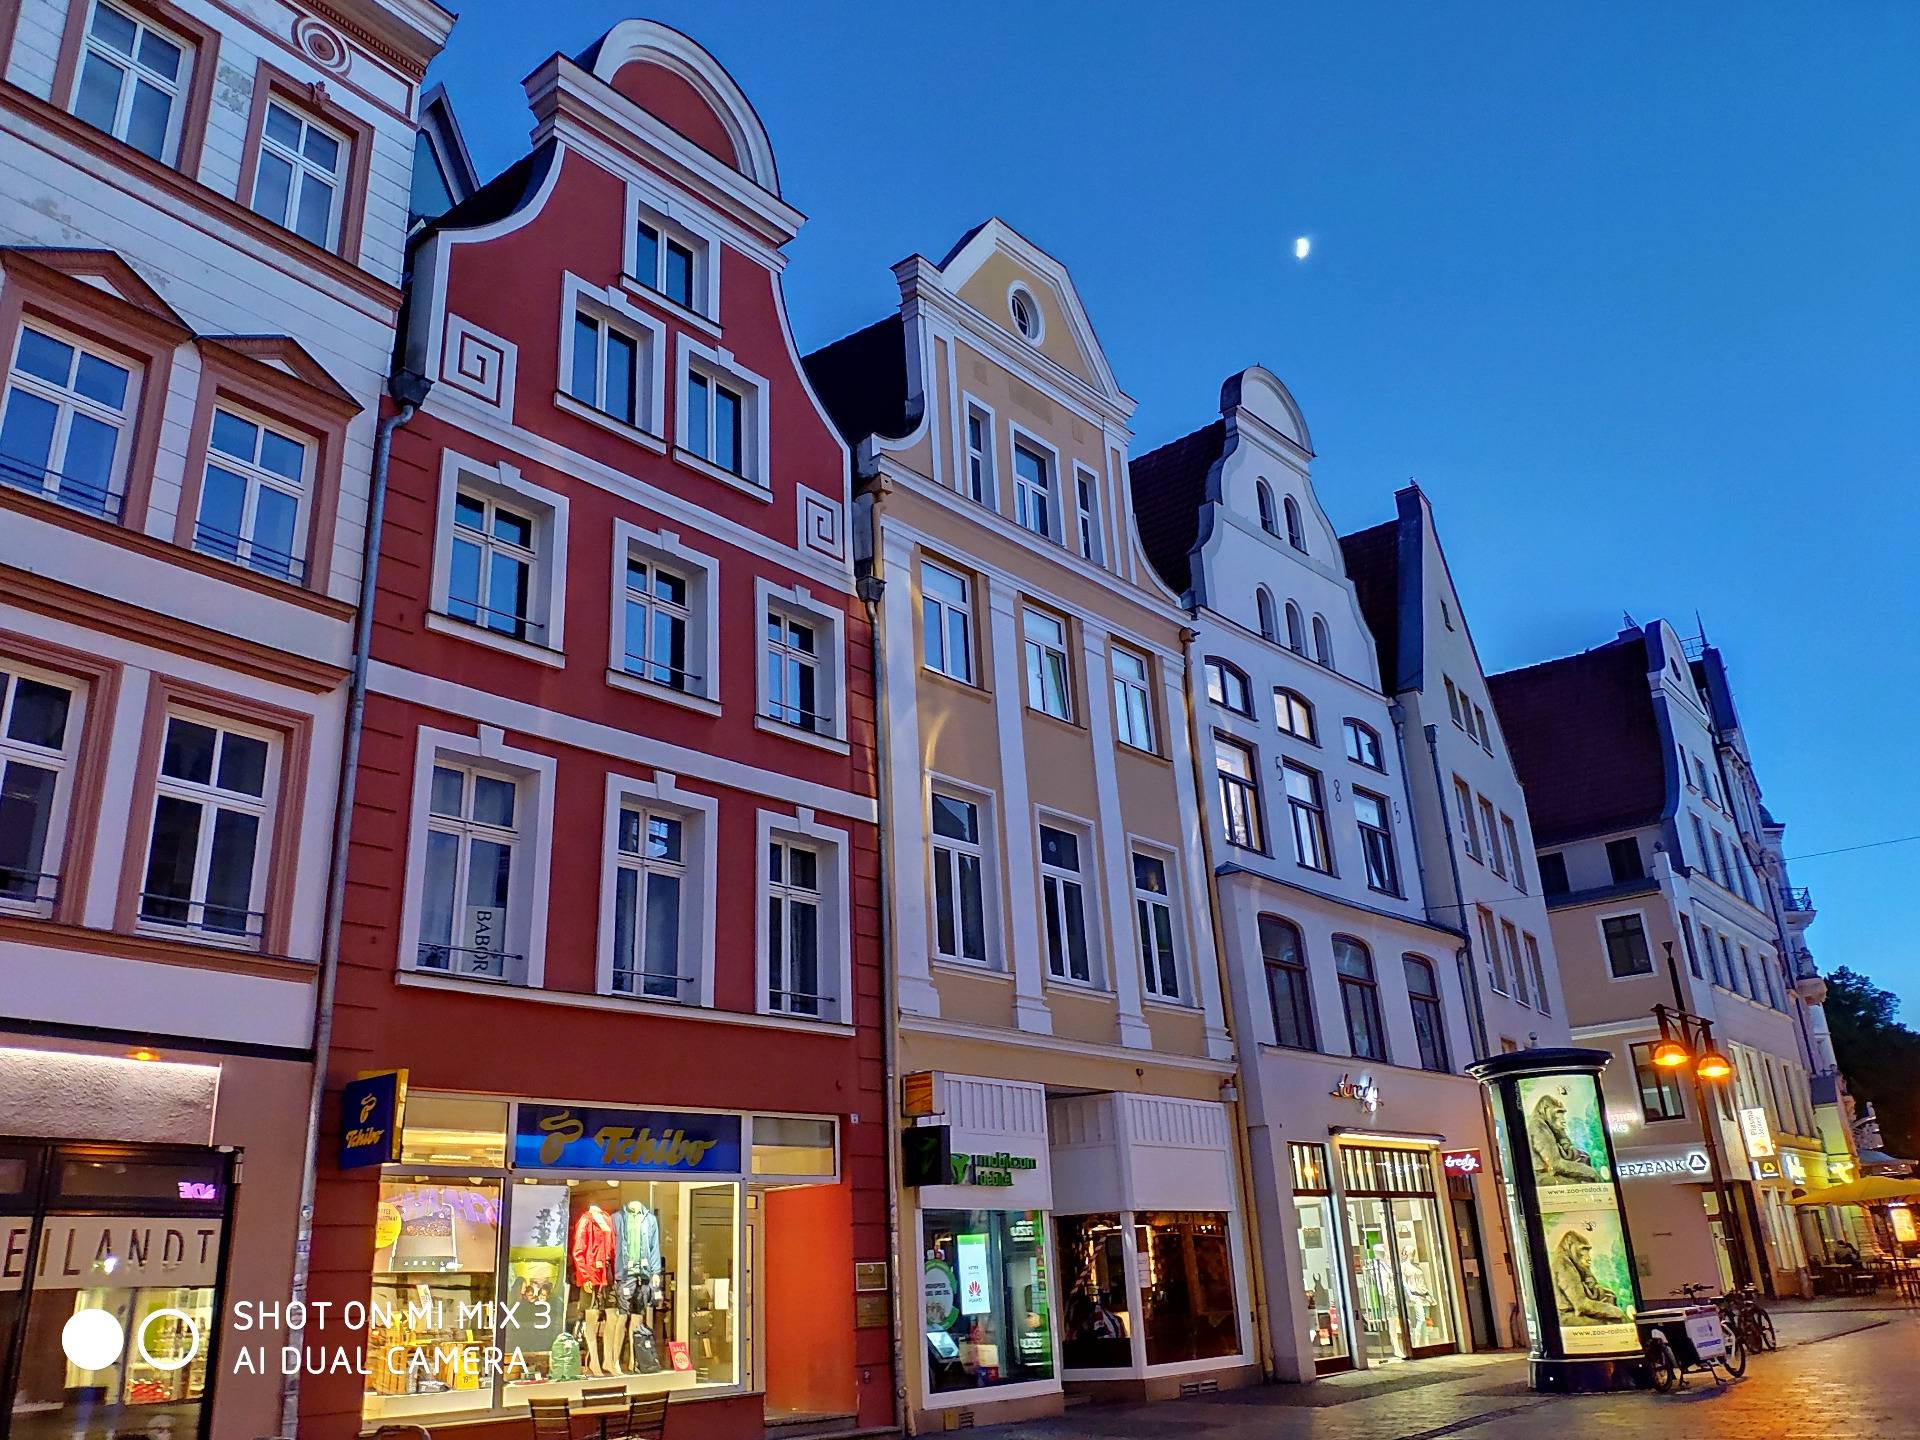 Incredible house facades in Rostock - almost like a picture book!